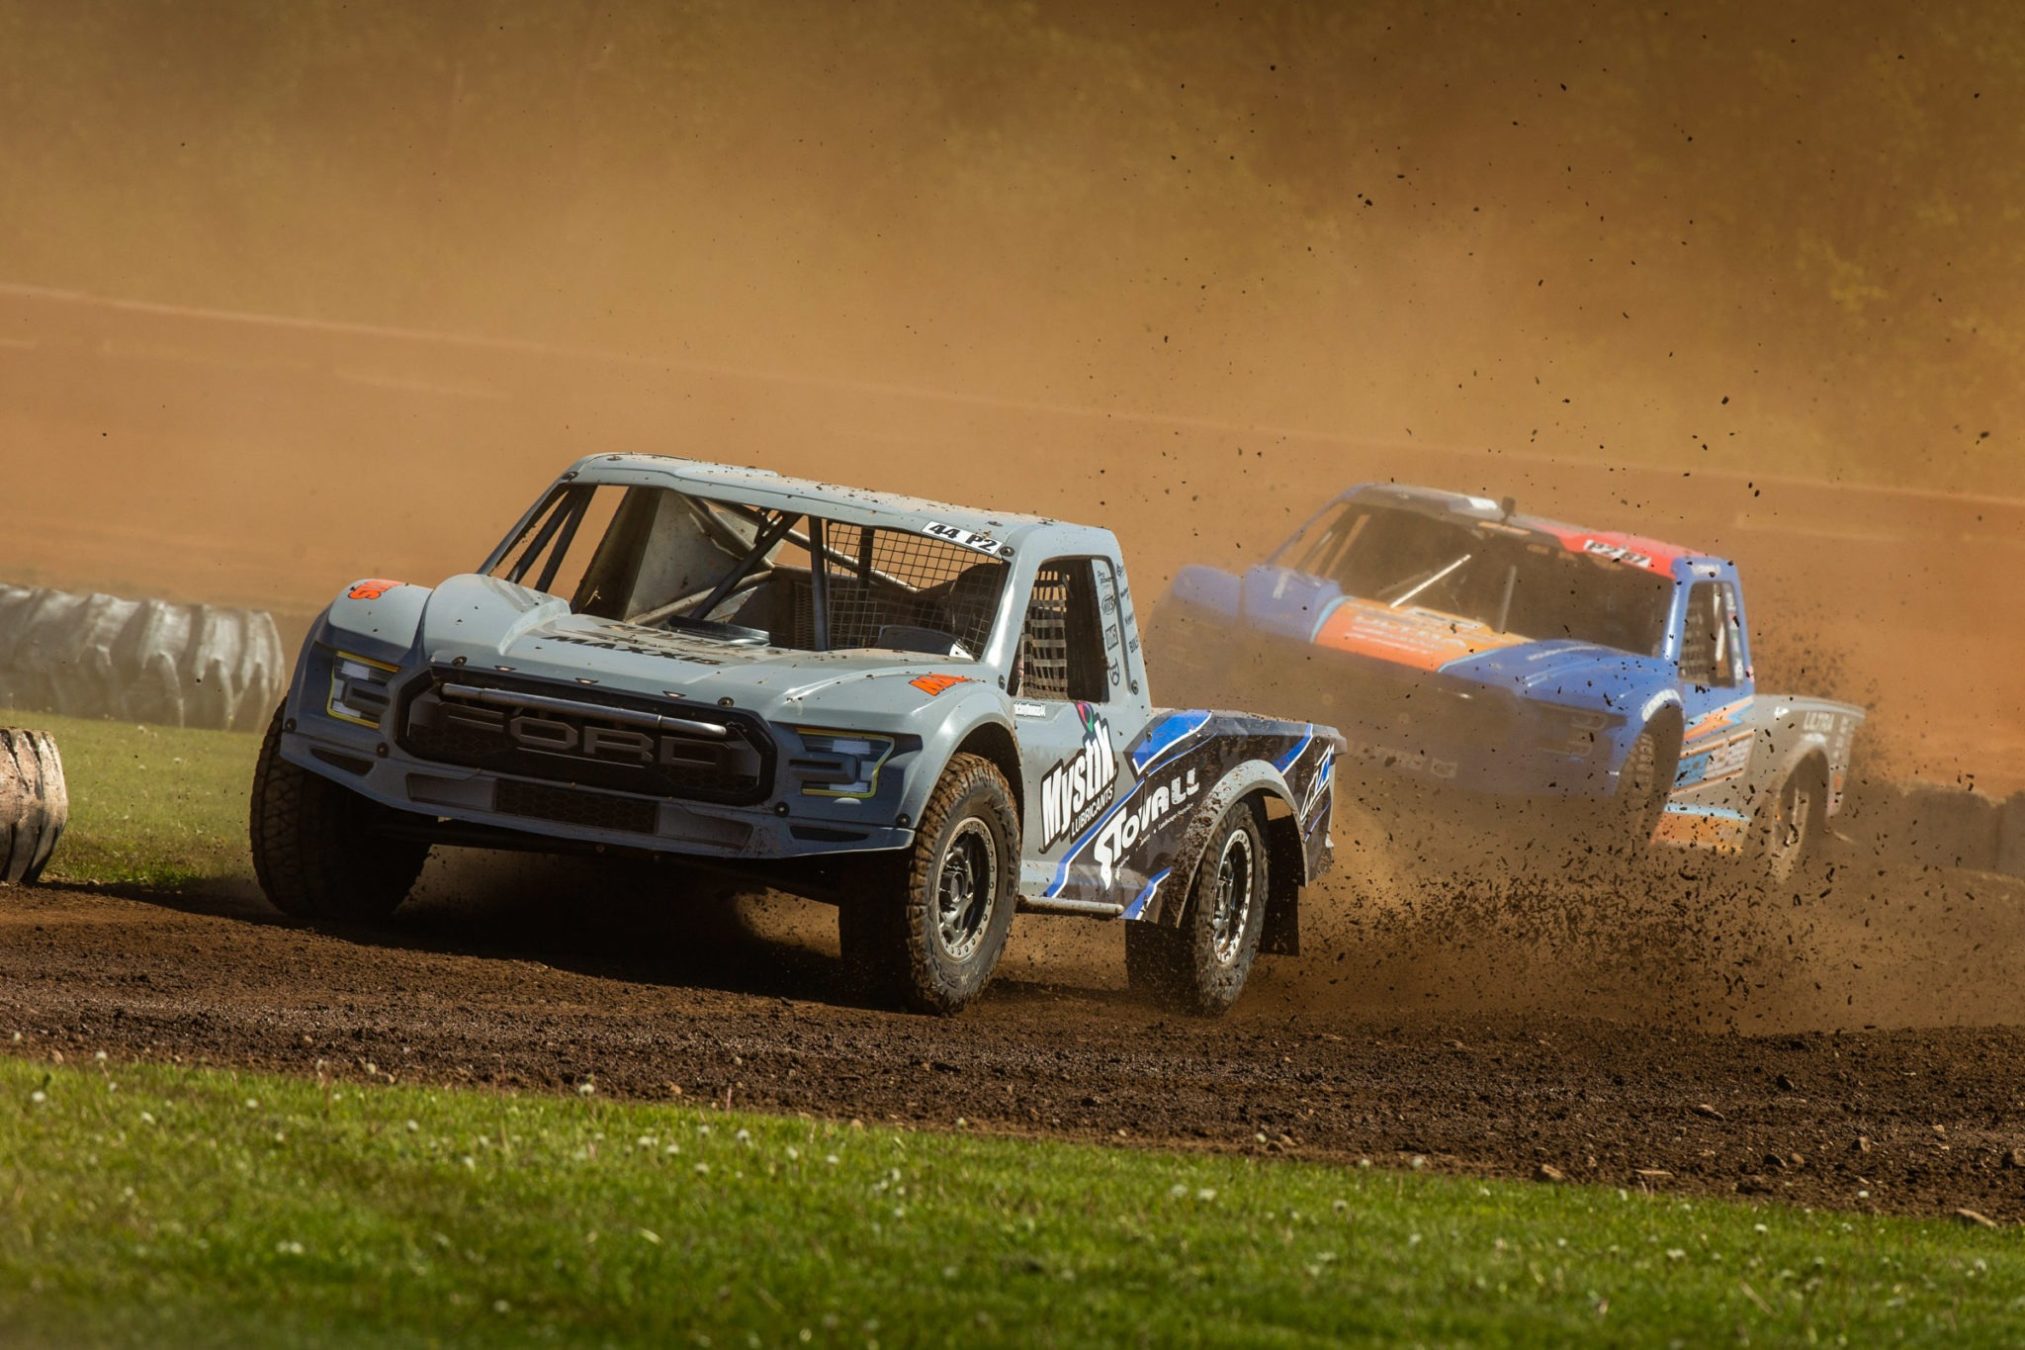 Two racing trucks racing on the dirt race road.